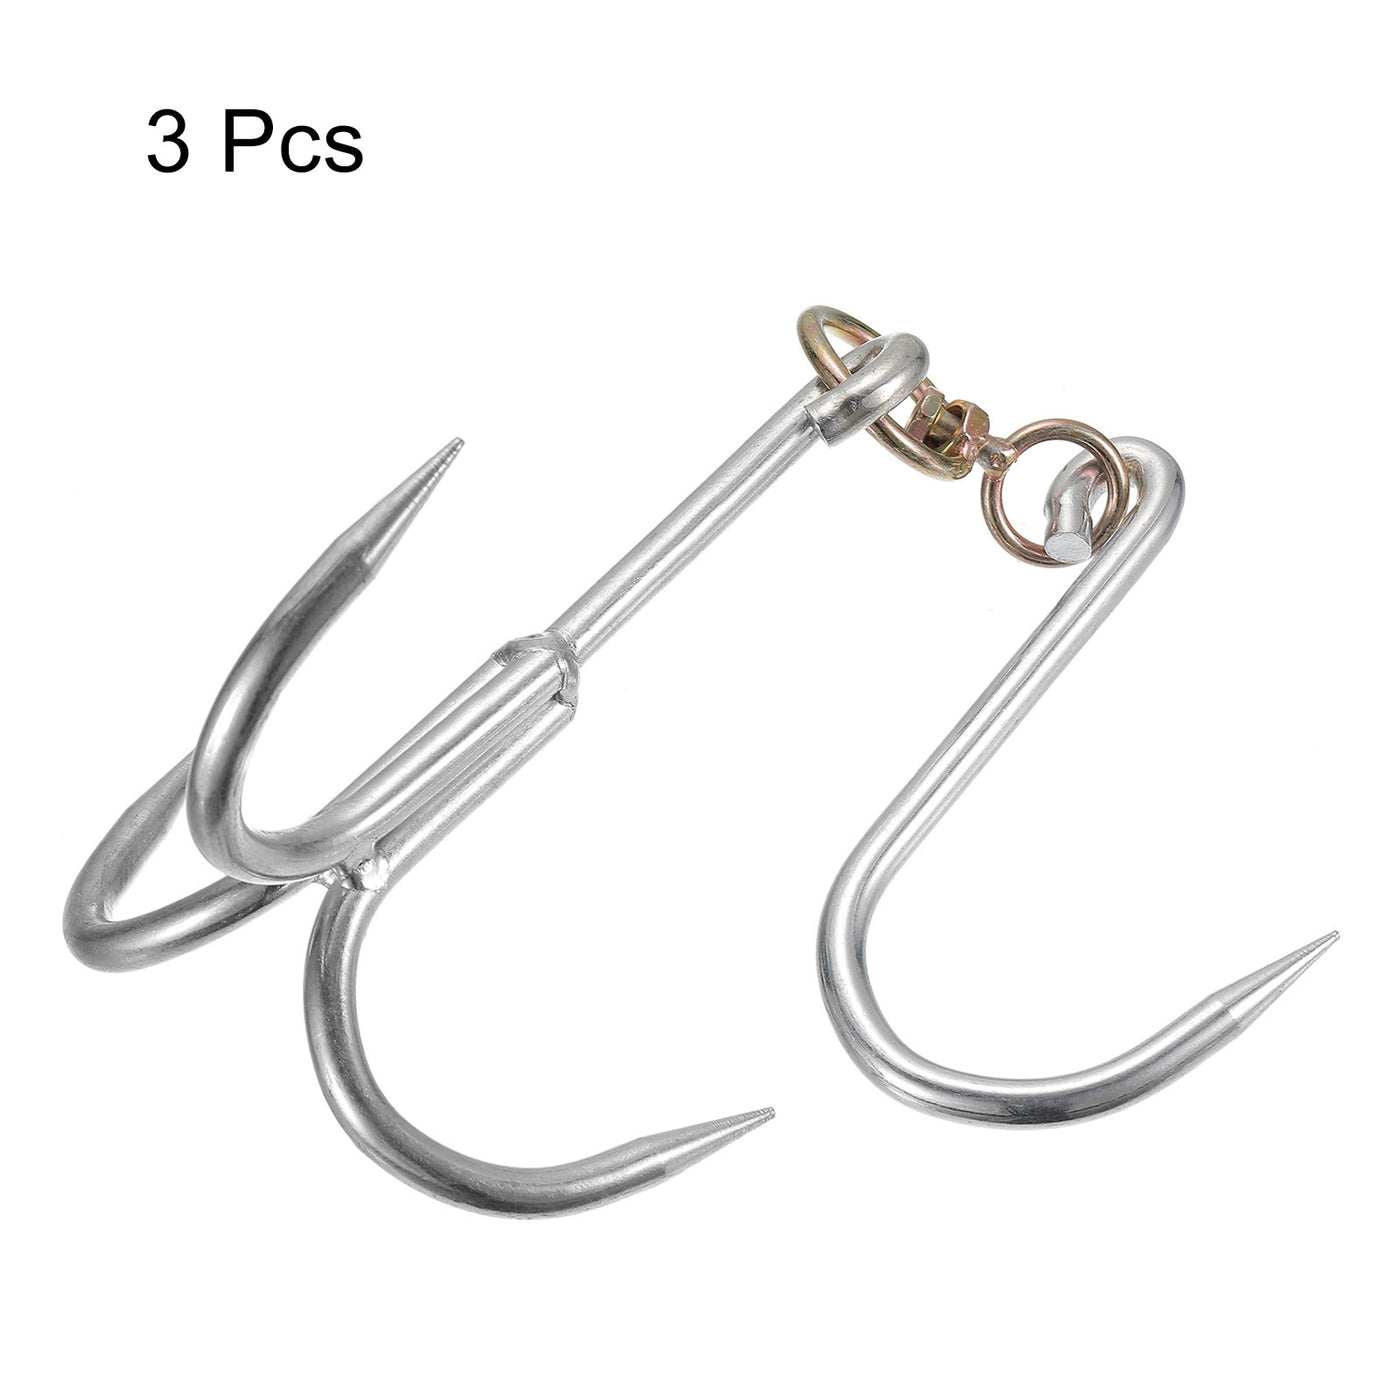 uxcell Uxcell Swiveling Meat Hook, Galvanized Three-Prong Meat Hooks for Hanging Drying Smoking Meat